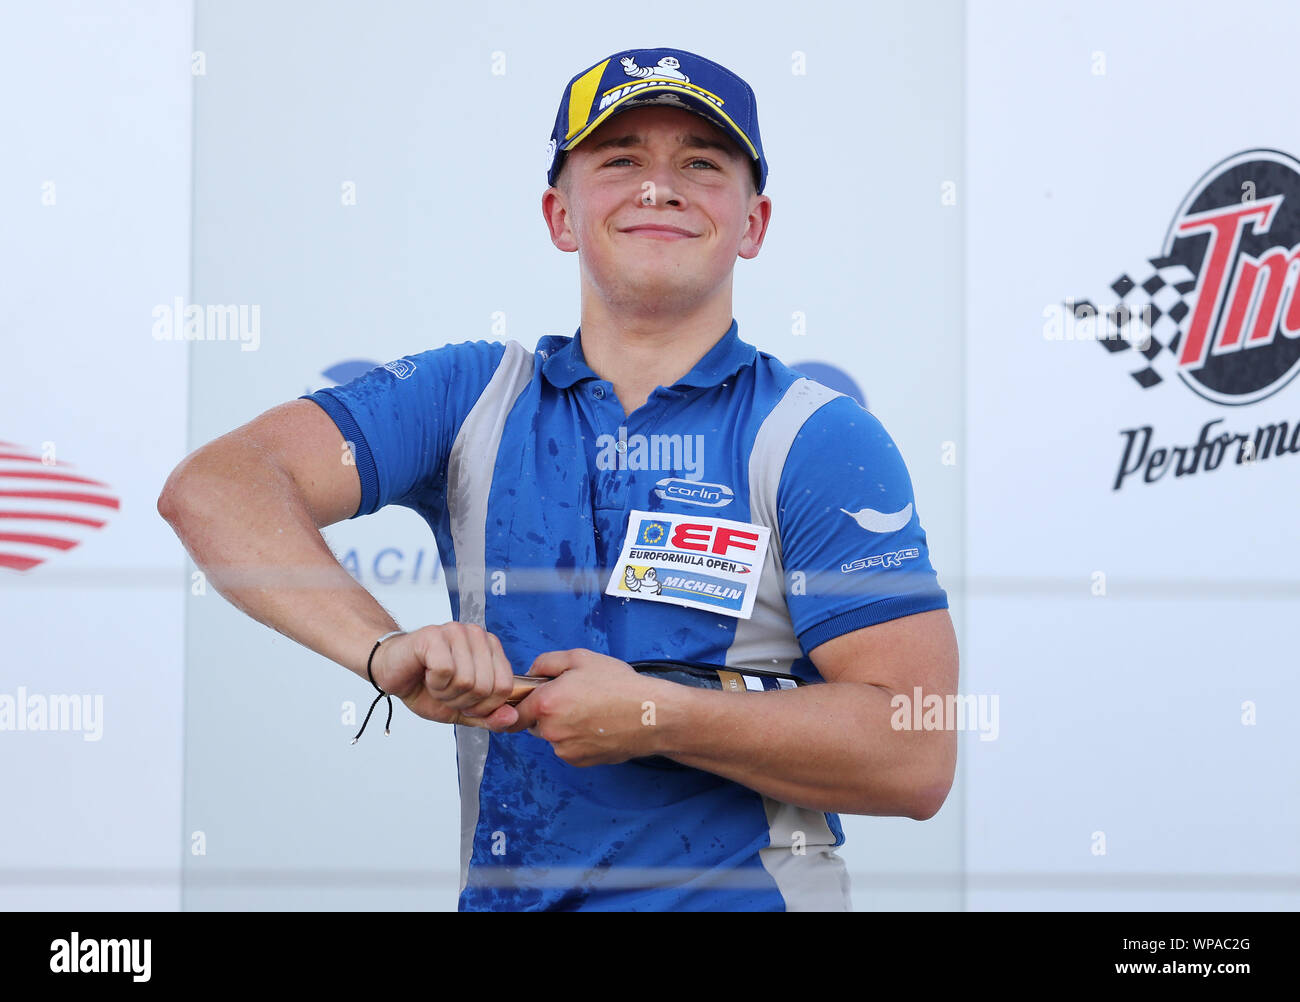 Carlin Motorsport's Billy Monger struggles to open the champagne after finishing third in the rookie race 2 of the Euroformula Open at Silverstone, Towcester. Stock Photo